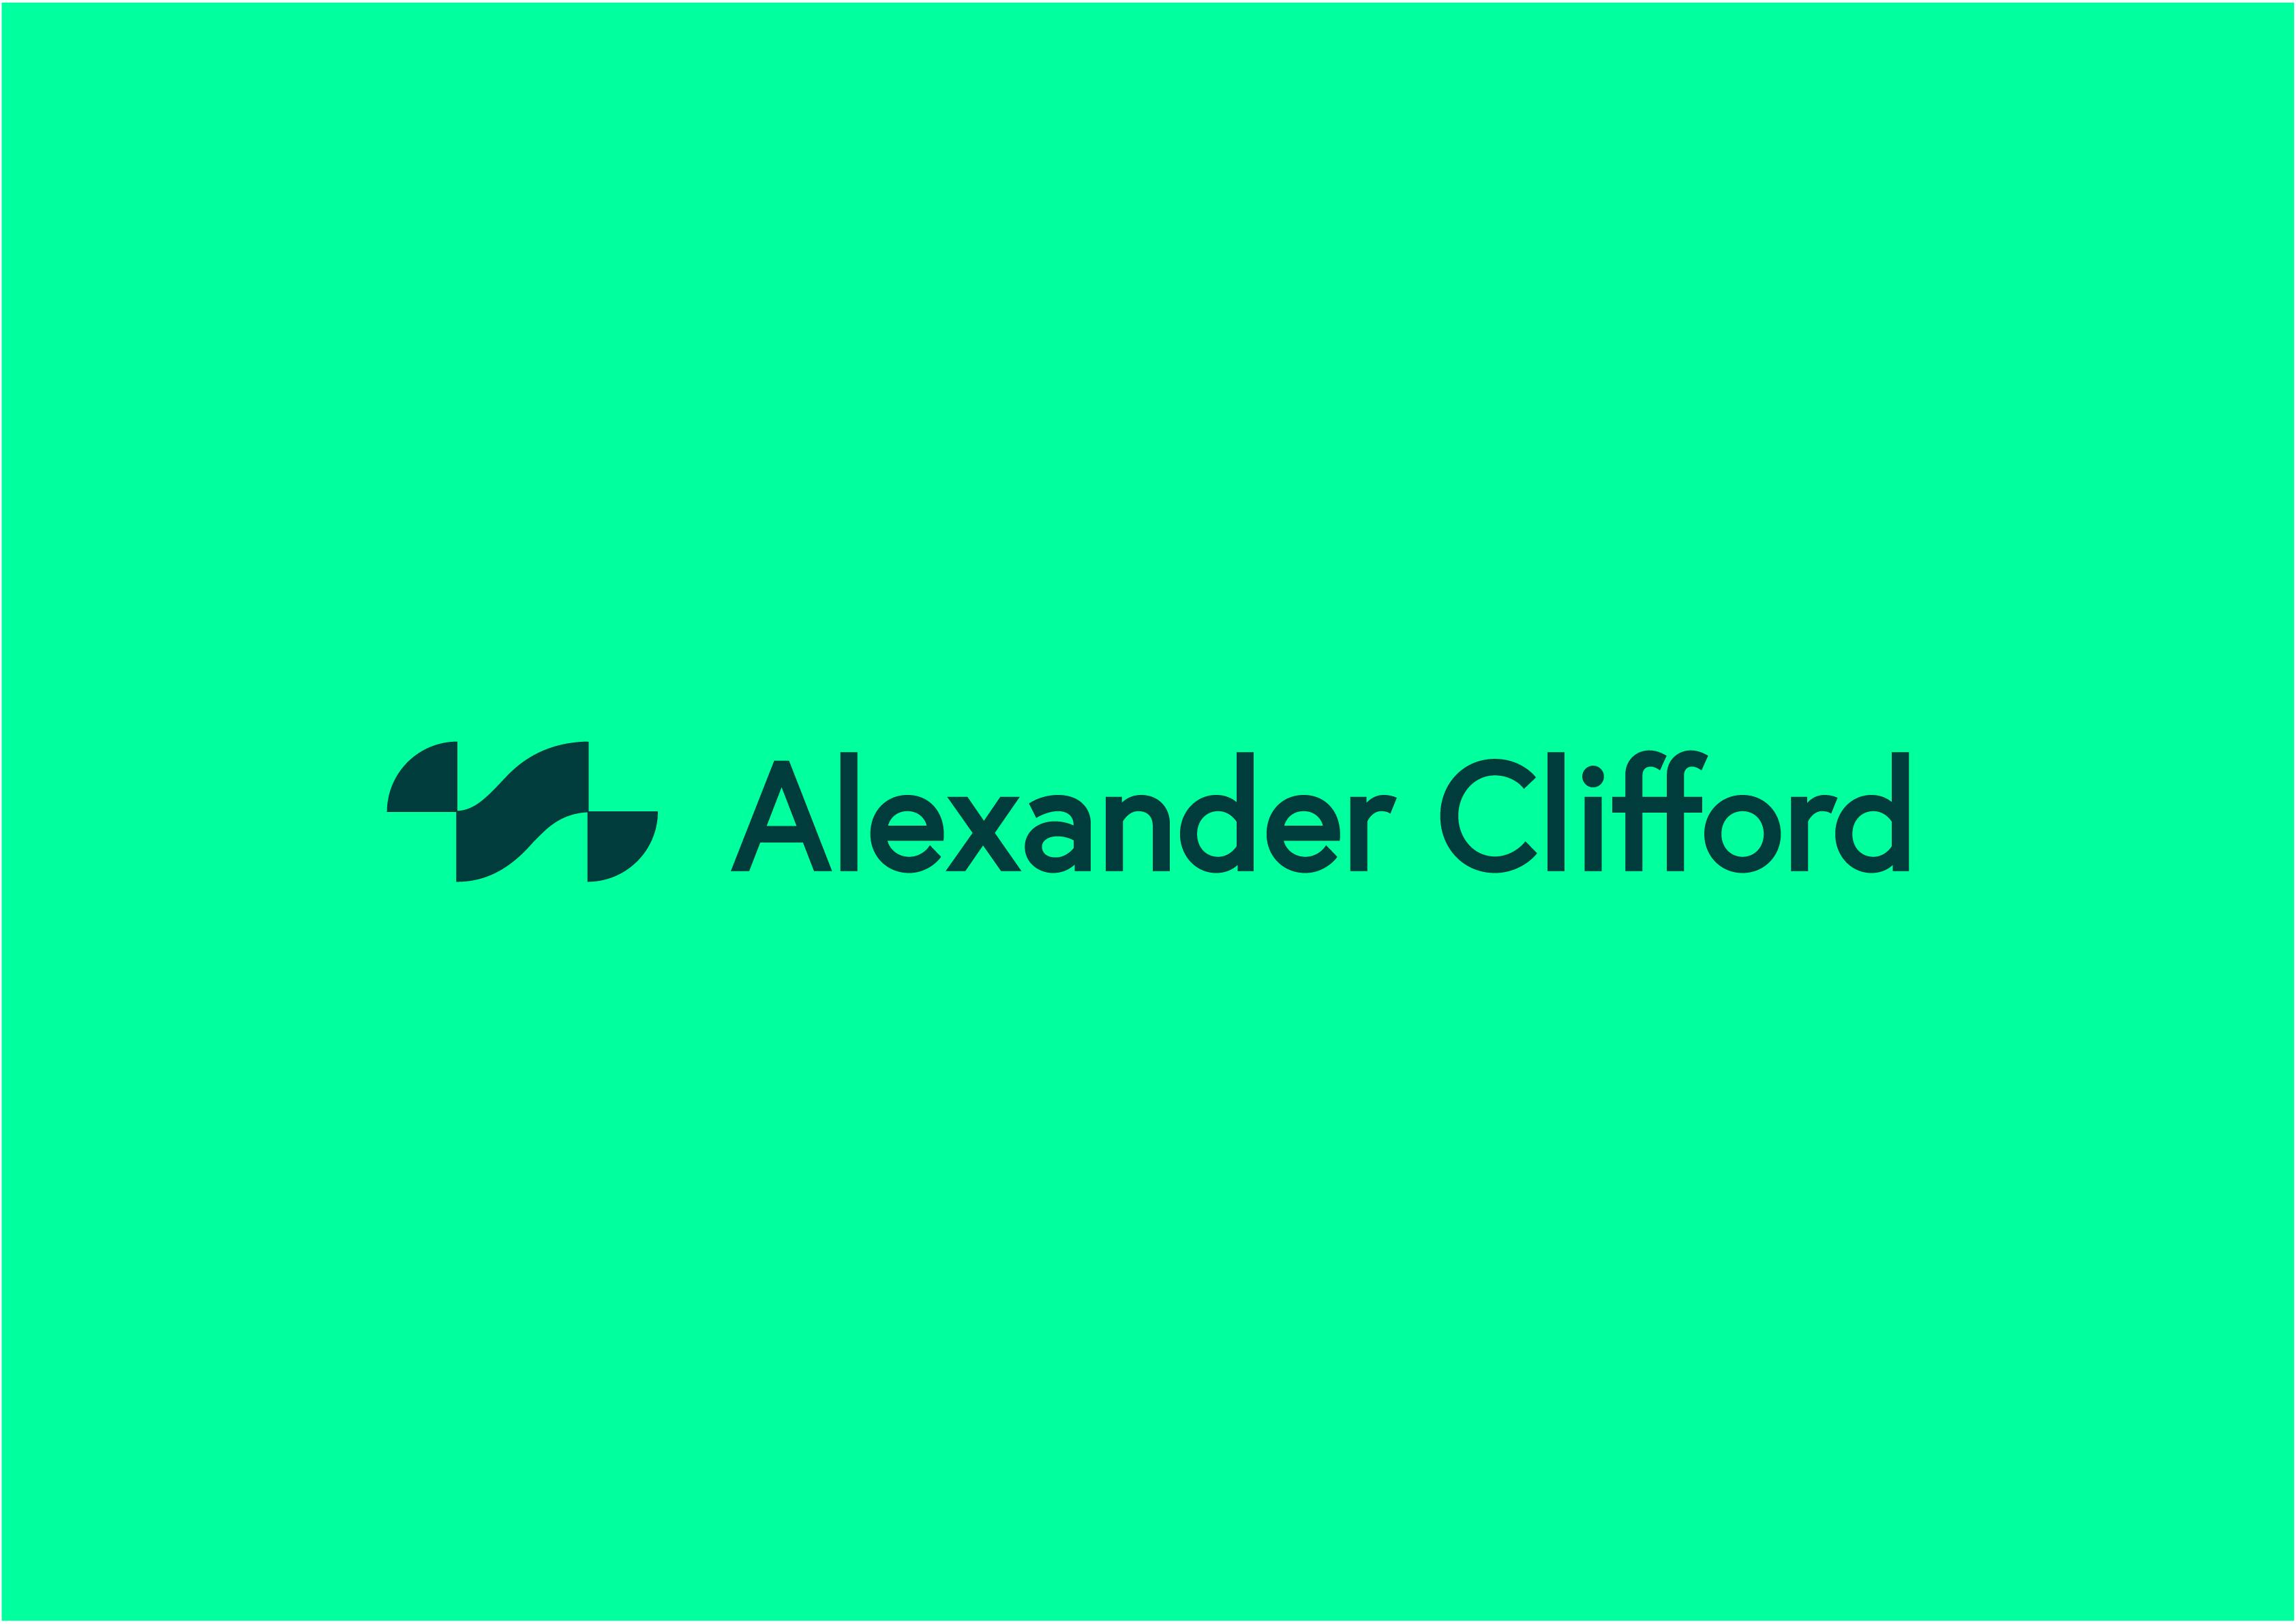 Main image for Alexander Clifford - R&D Tax Credit Specialists